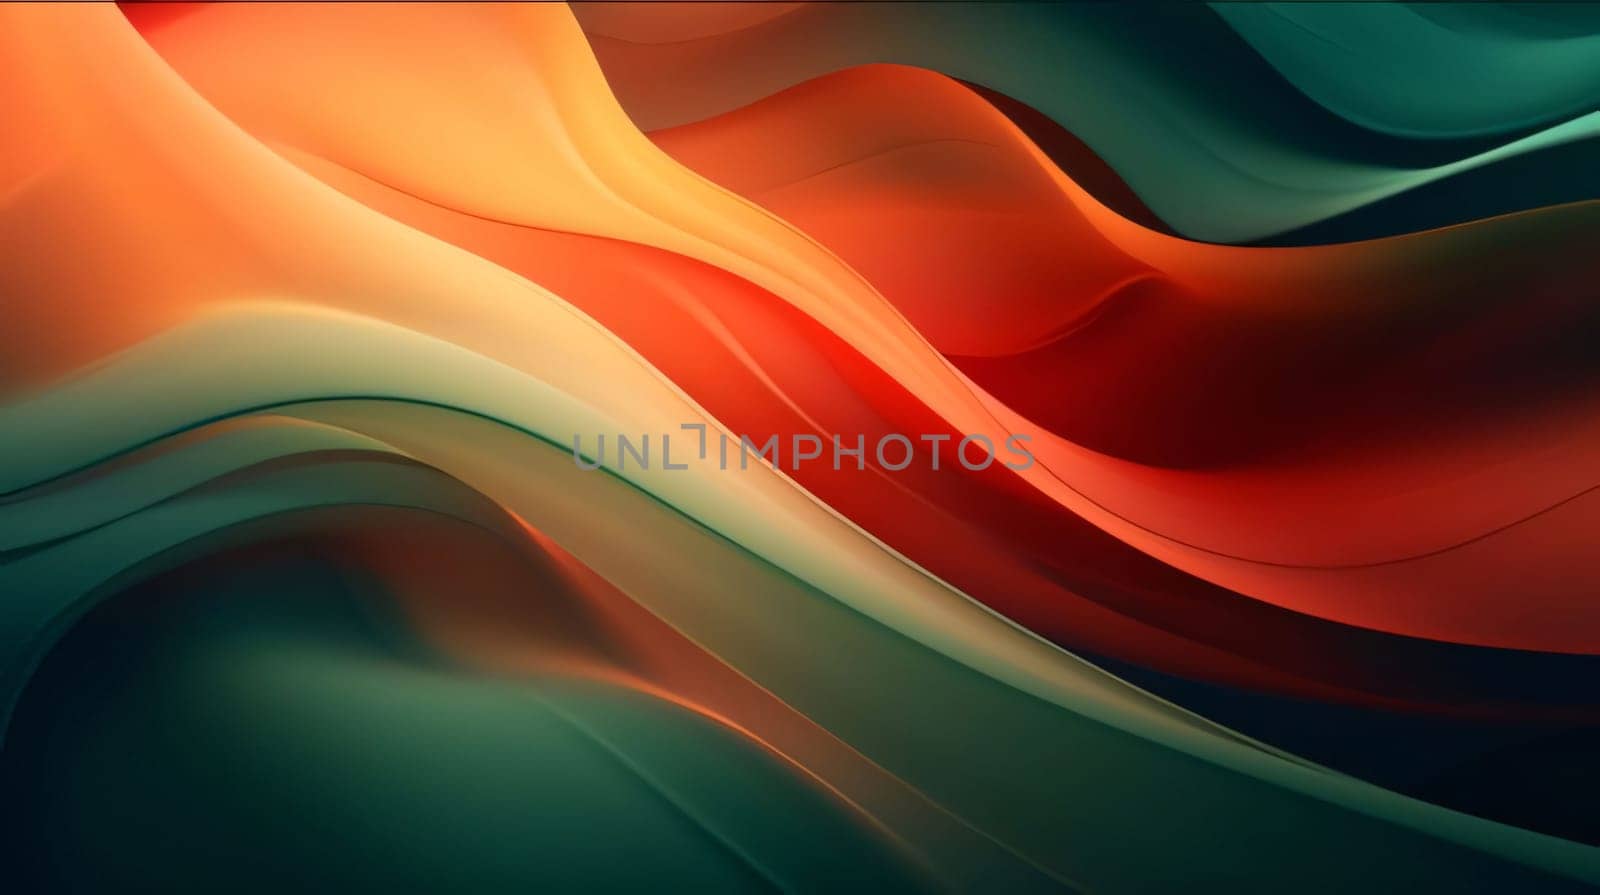 Abstract background design: abstract background with smooth lines in green, orange and yellow colors